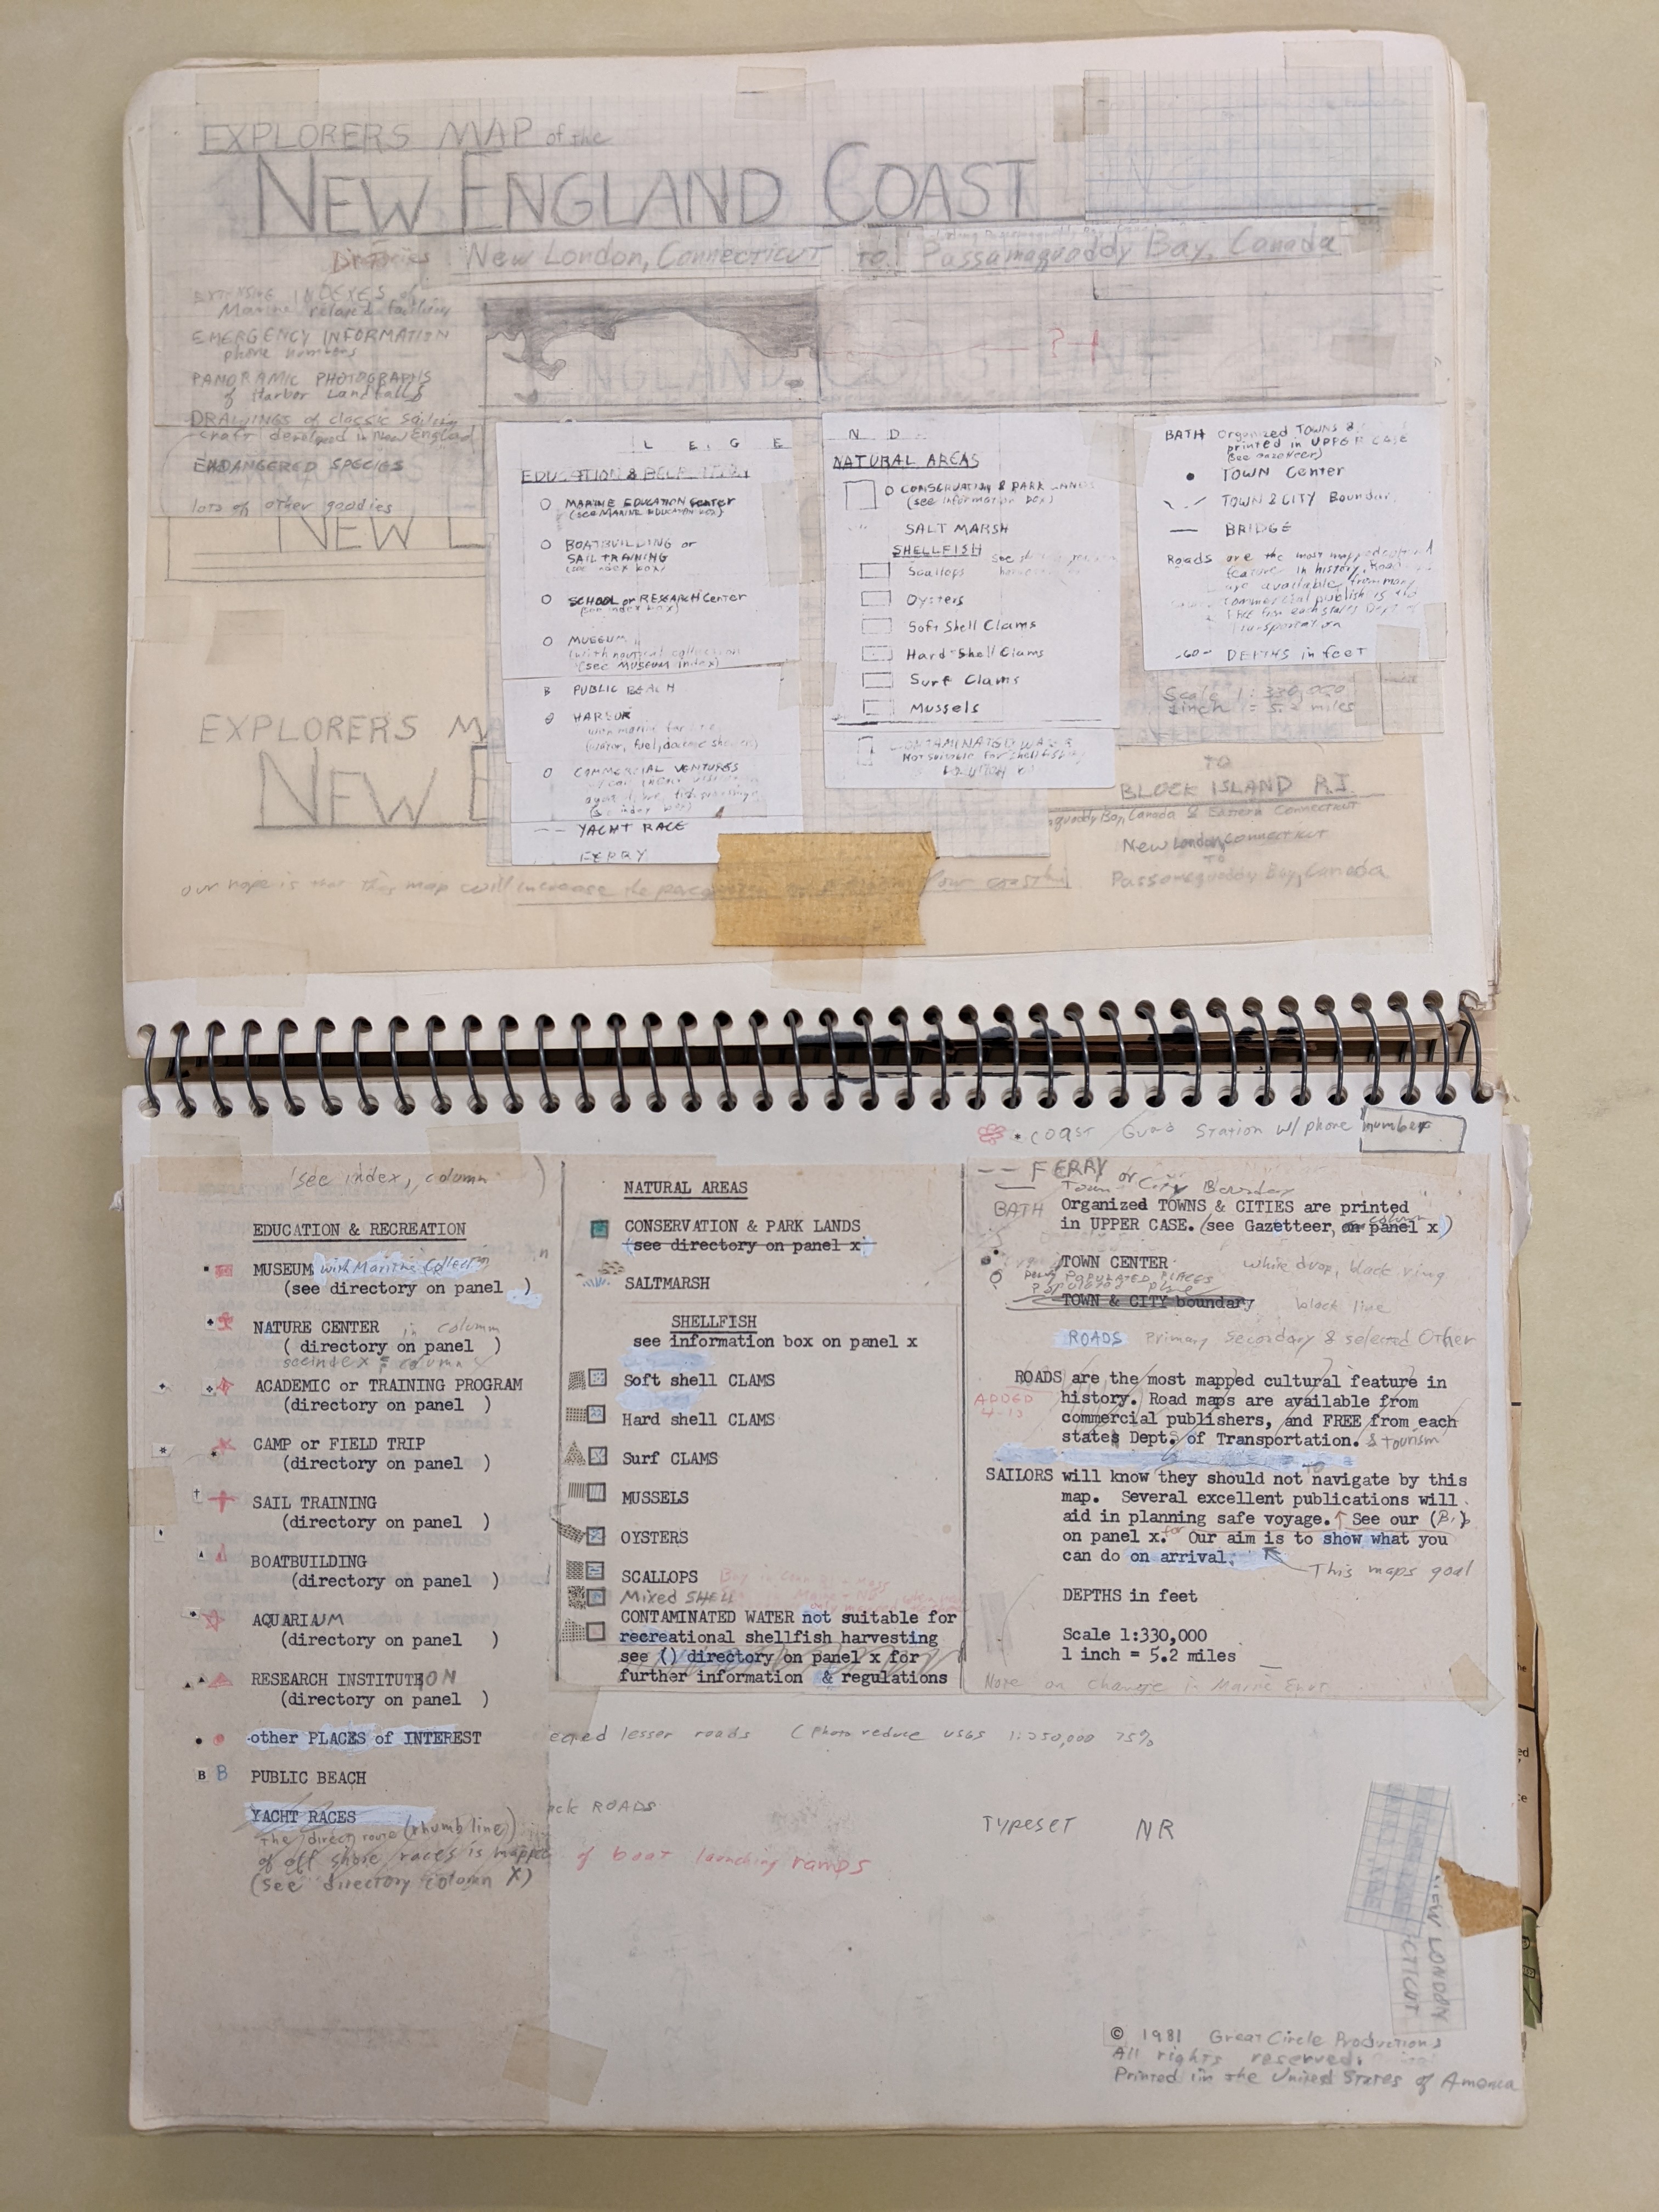 Page in a notebook showing design notes for Weaver's 'Explorer's map of the New England Coast'